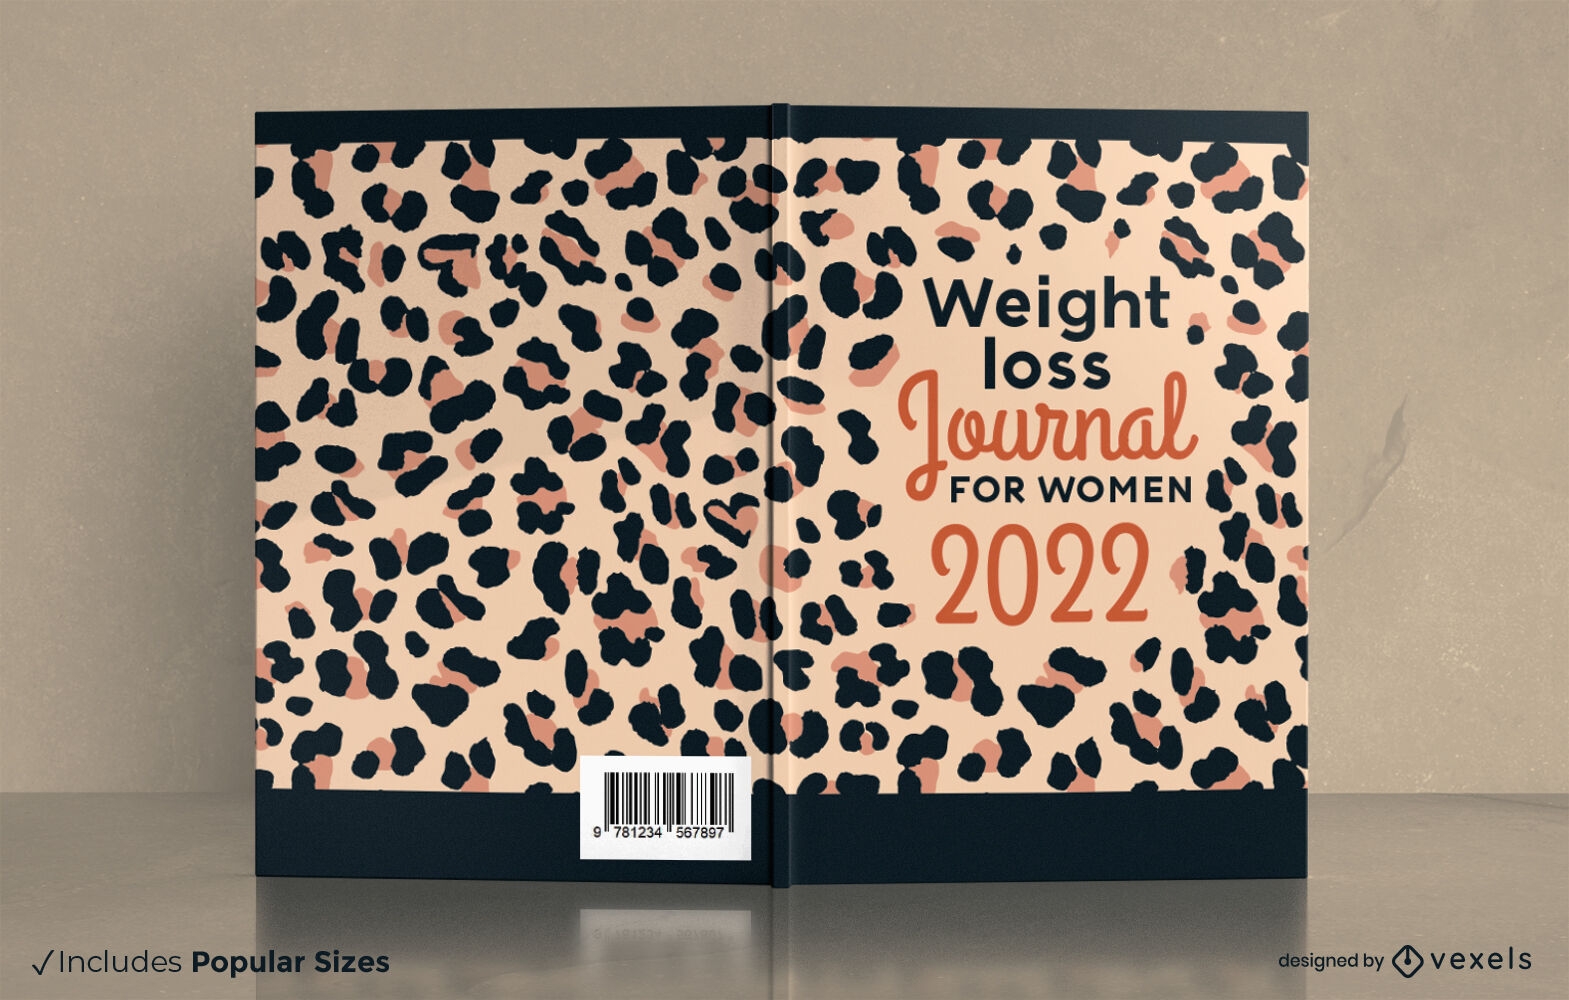 Weight loss animal print journal book cover design